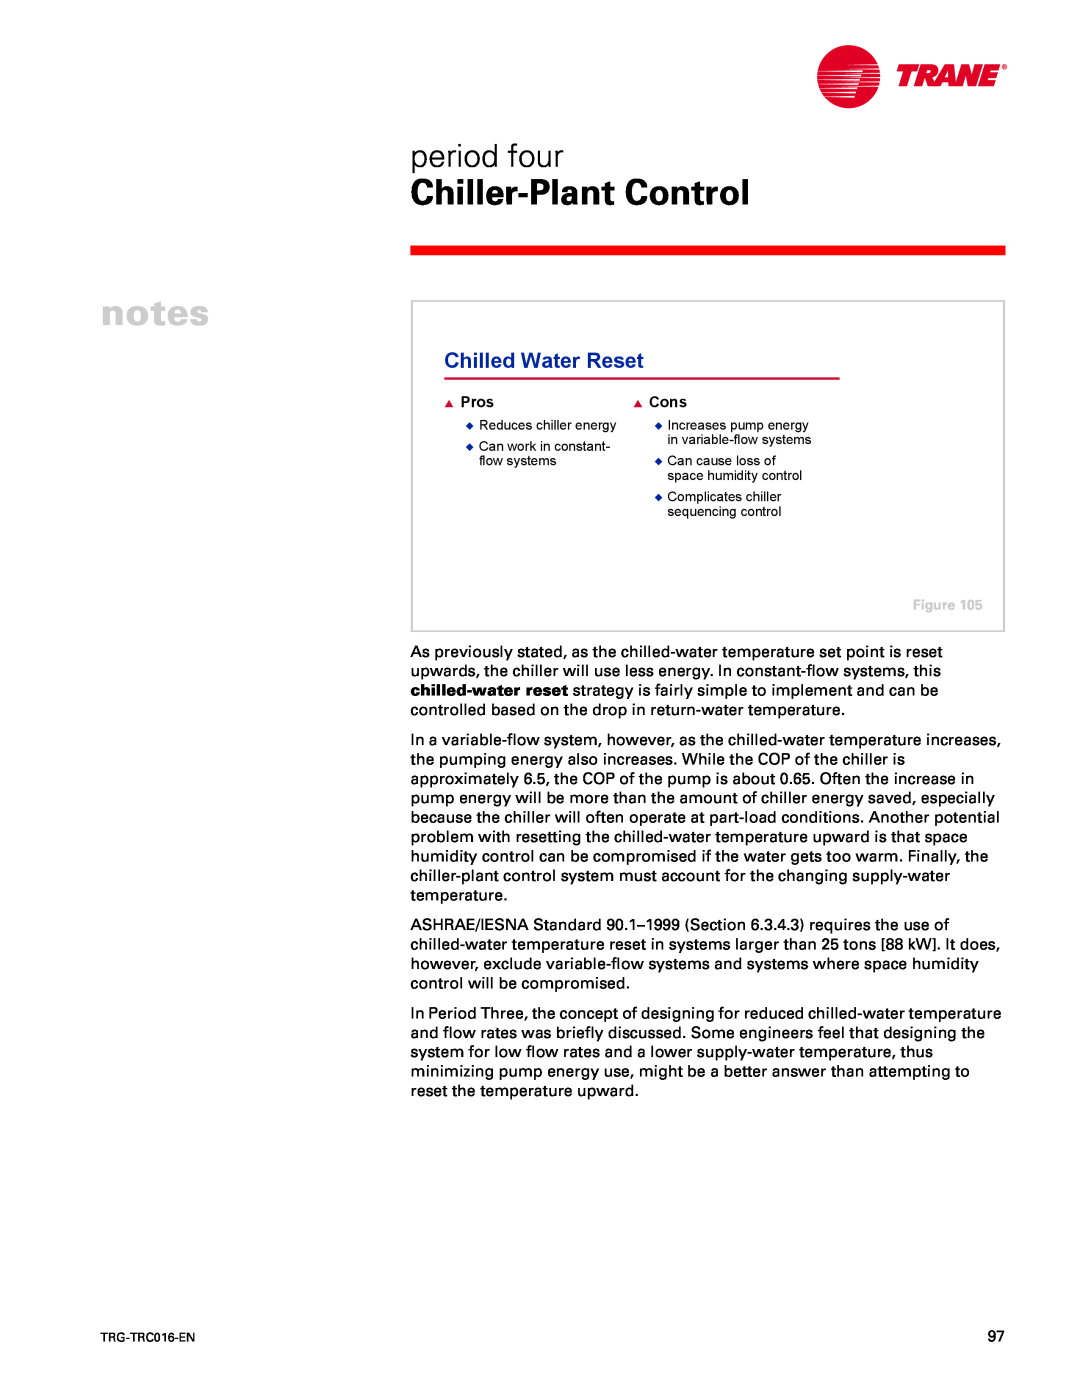 Trane TRG-TRC016-EN manual Chilled Water Reset, notes, Chiller-PlantControl, period four, Pros, Cons 